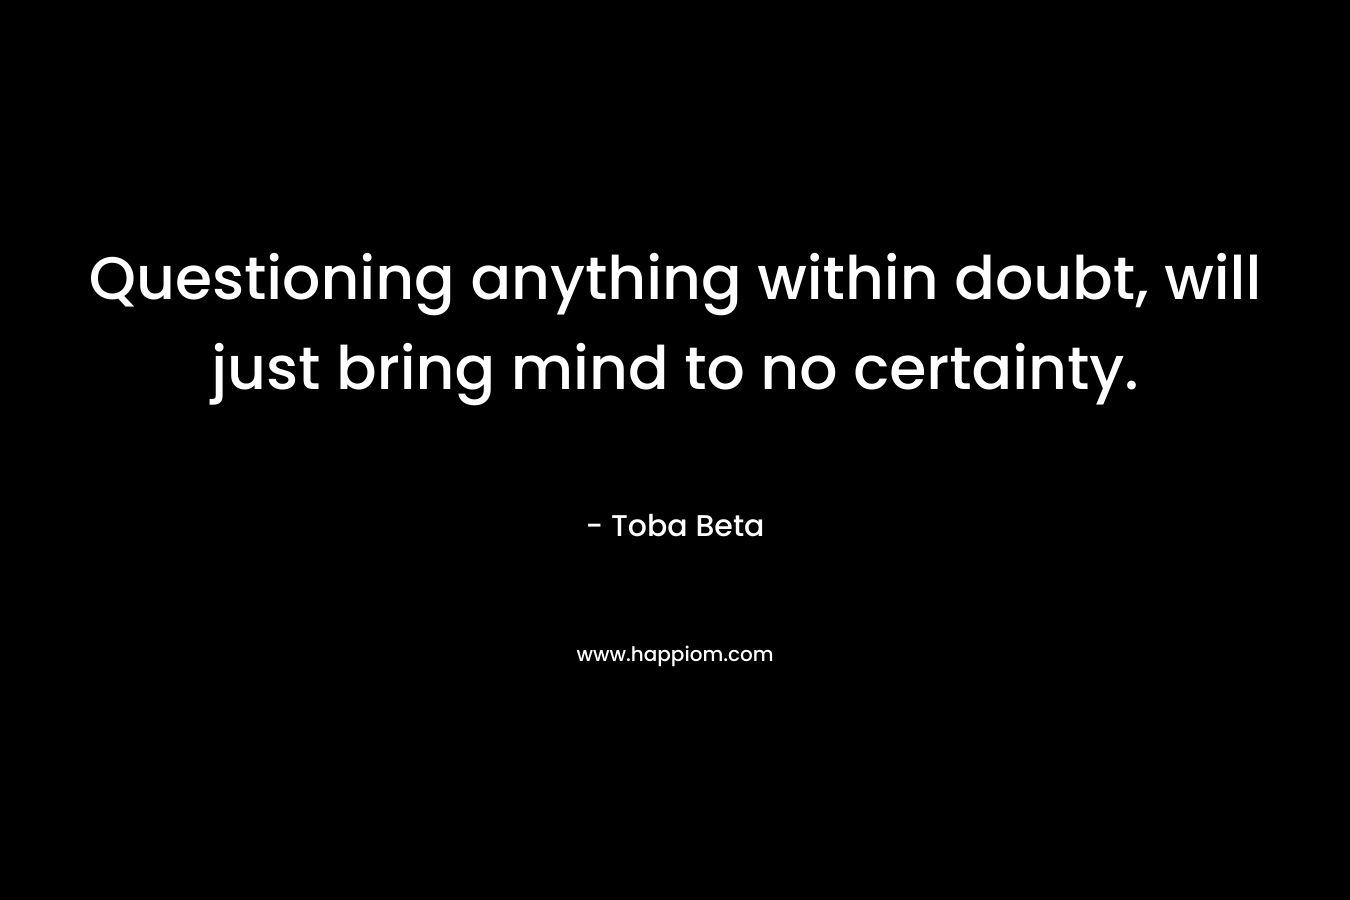 Questioning anything within doubt, will just bring mind to no certainty. – Toba Beta